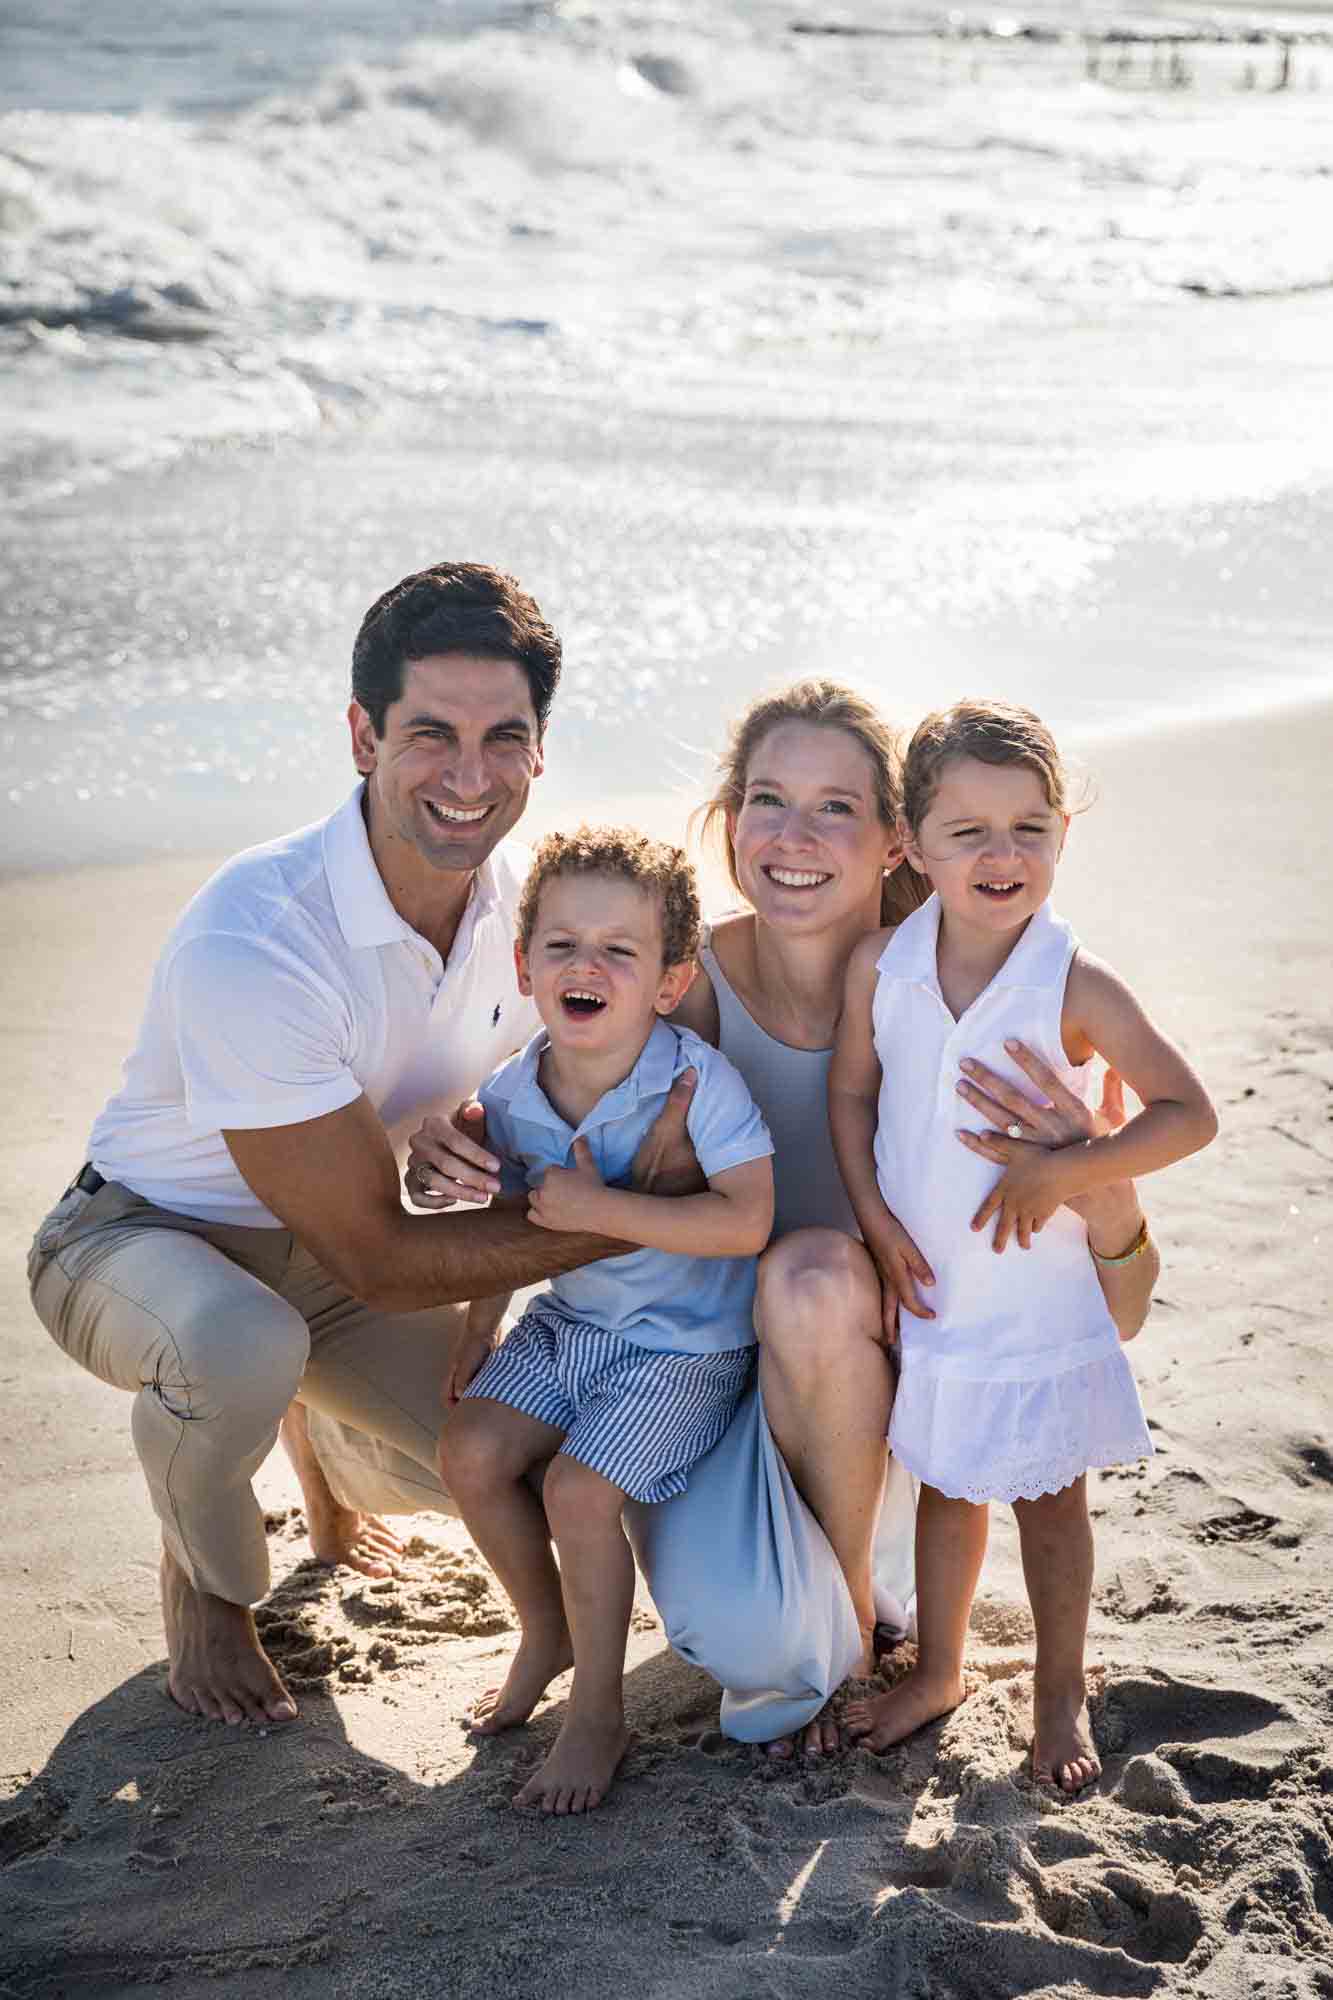 Parents with two small children on beach in front of ocean for an article on beach family portrait tips